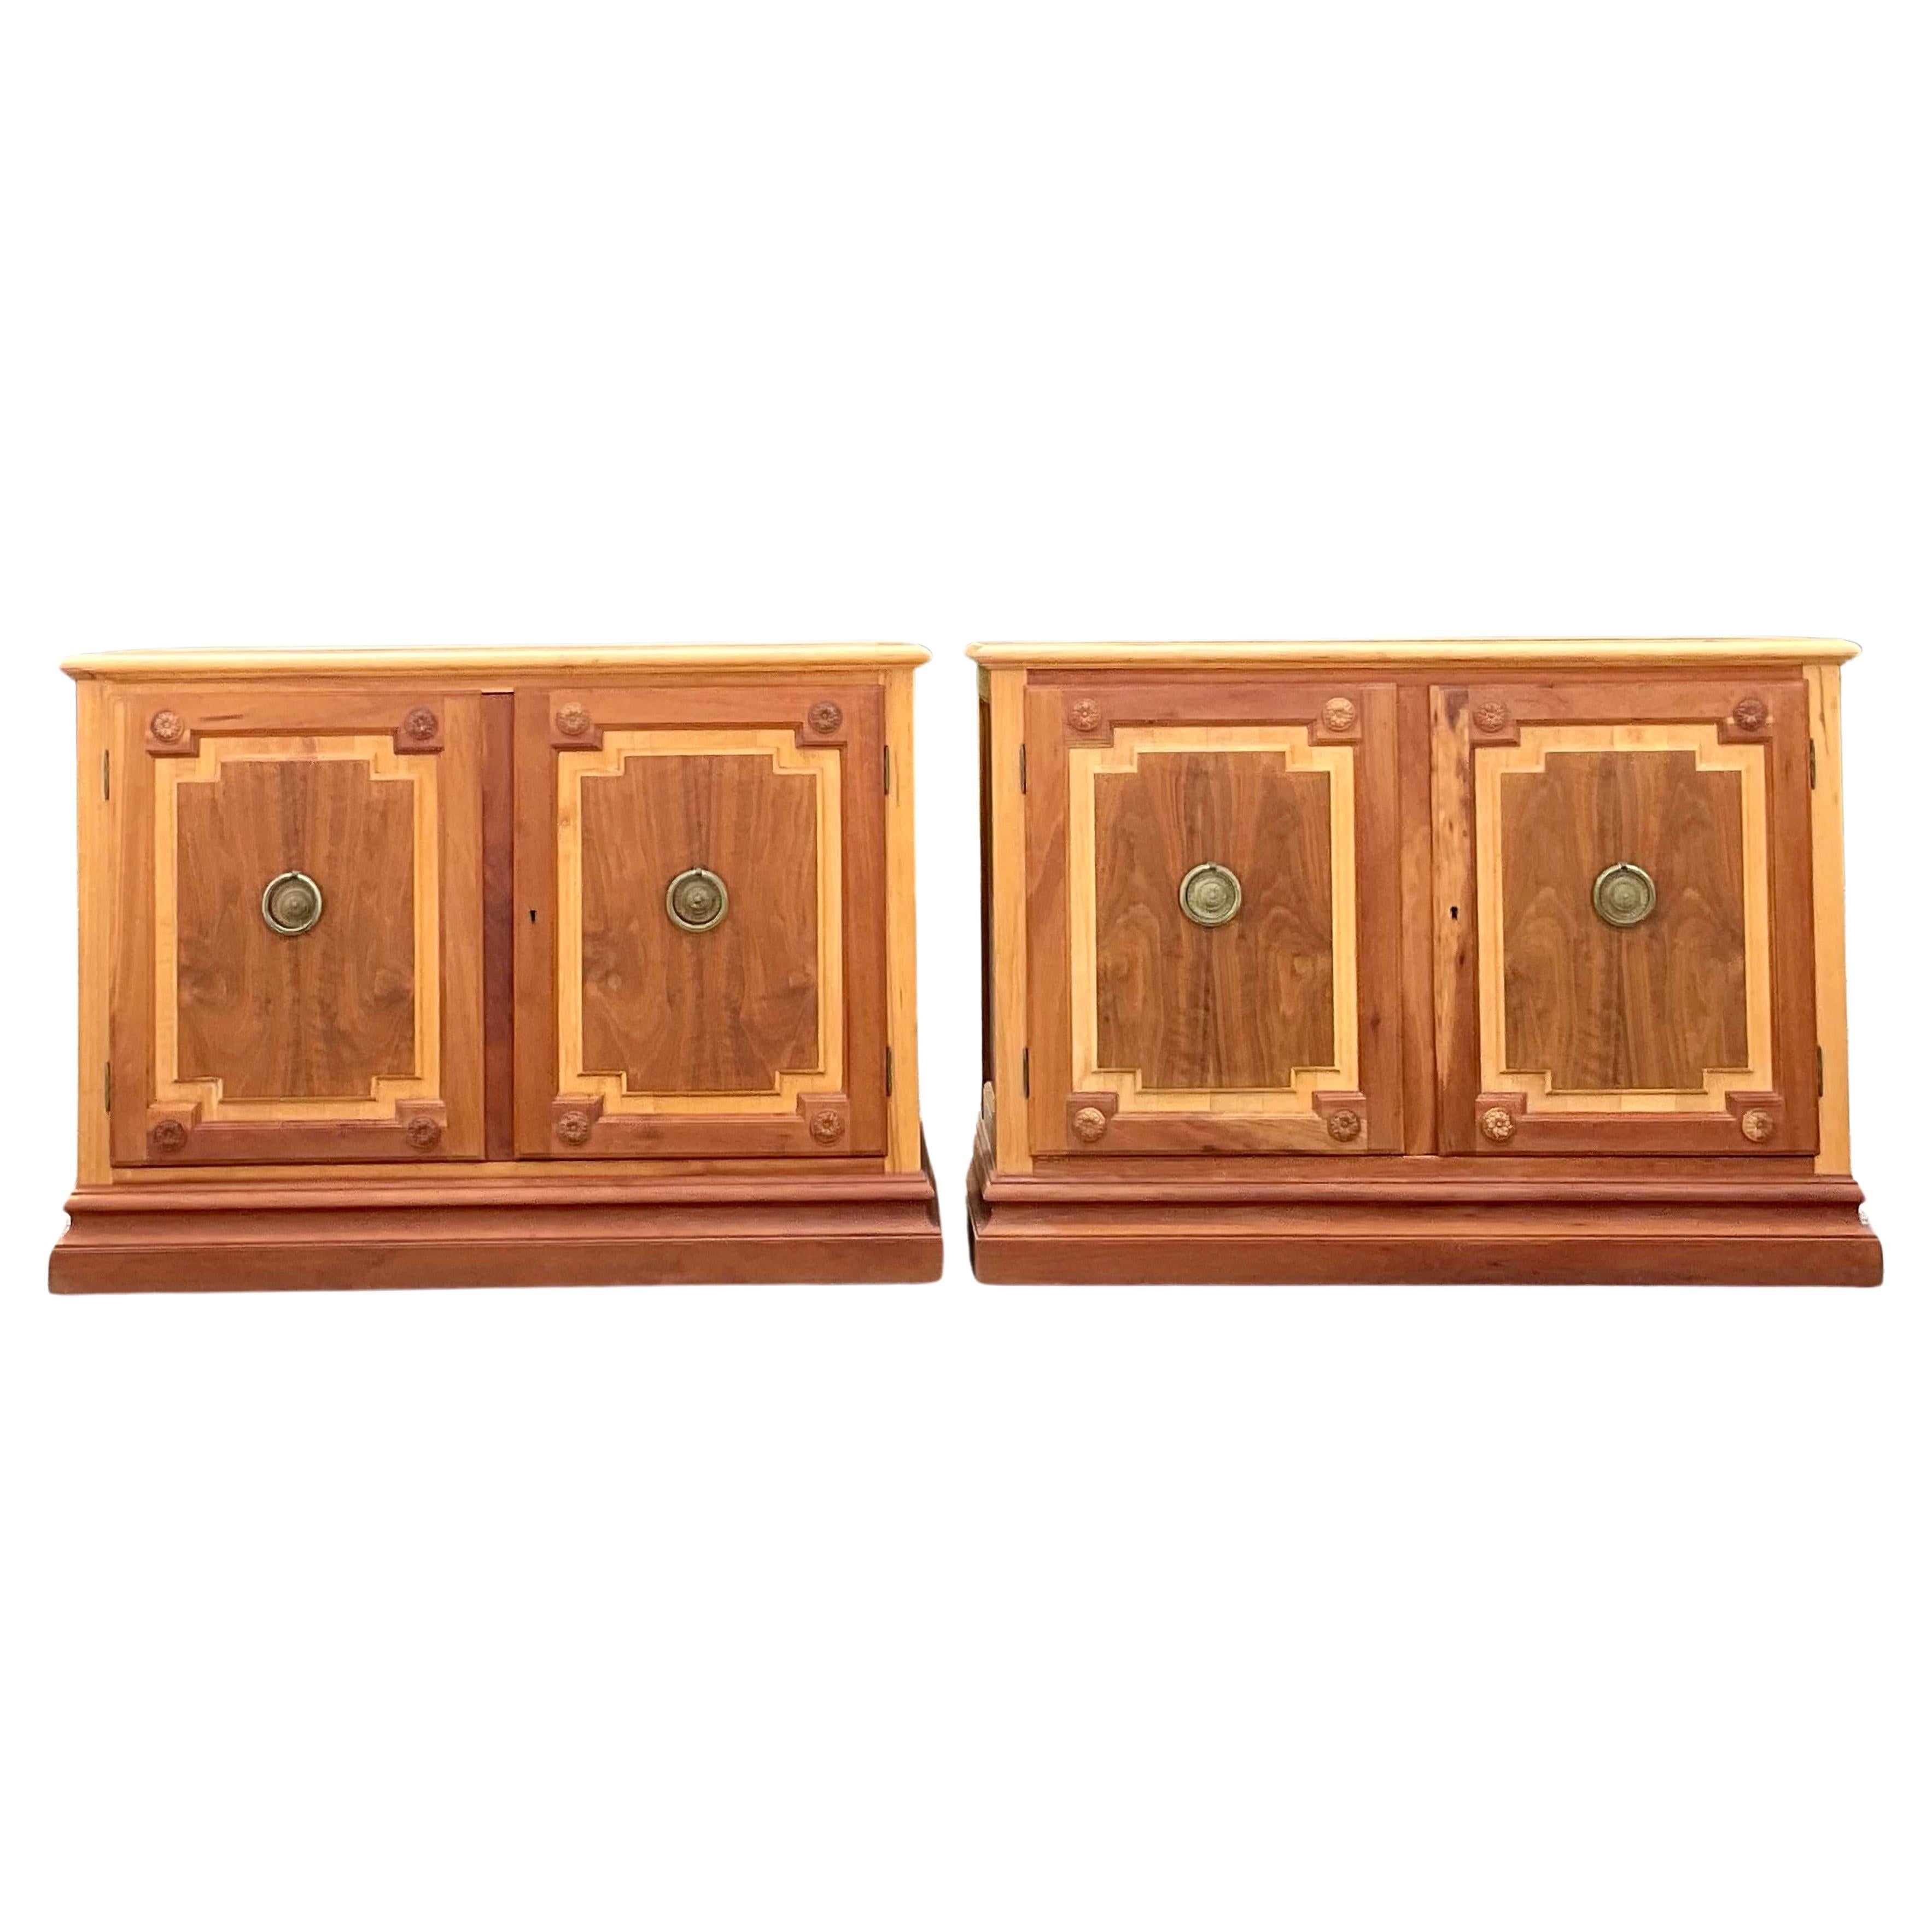 Late 20th Century Vintage Baker Notched Wood Sideboards - a Pair For Sale